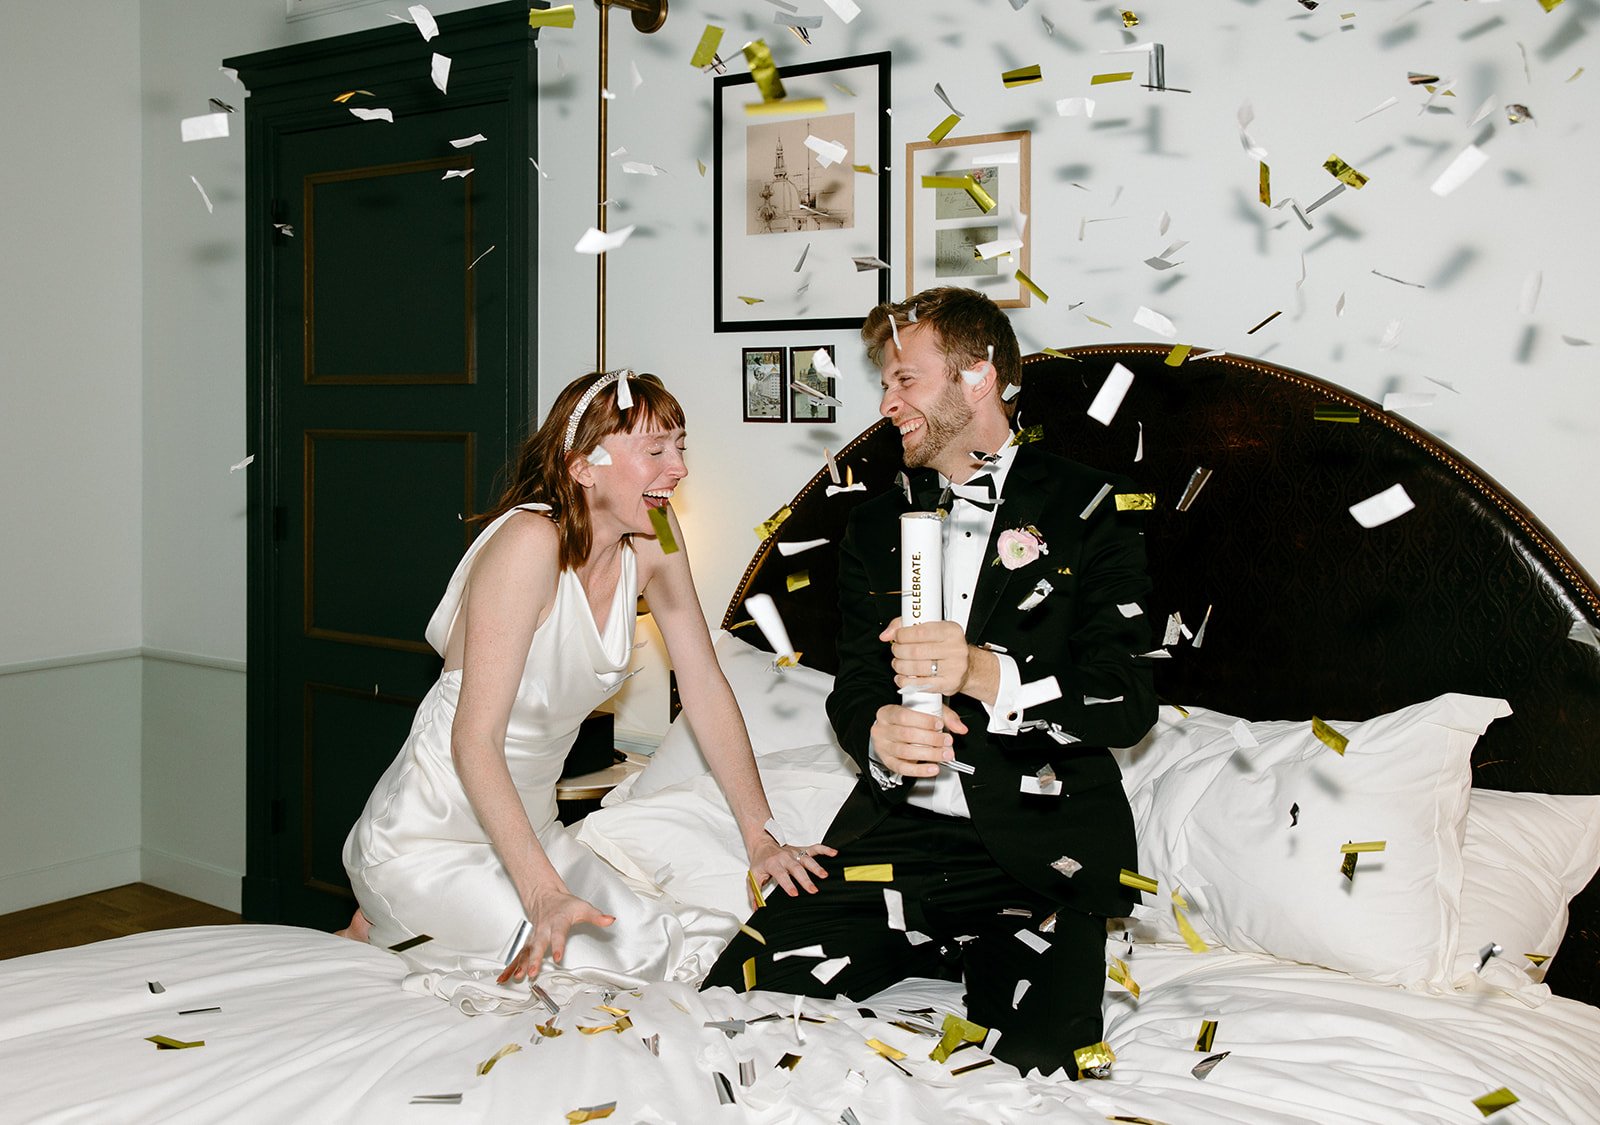 flash photos capture bride and groom throwing confetti around their hotel room